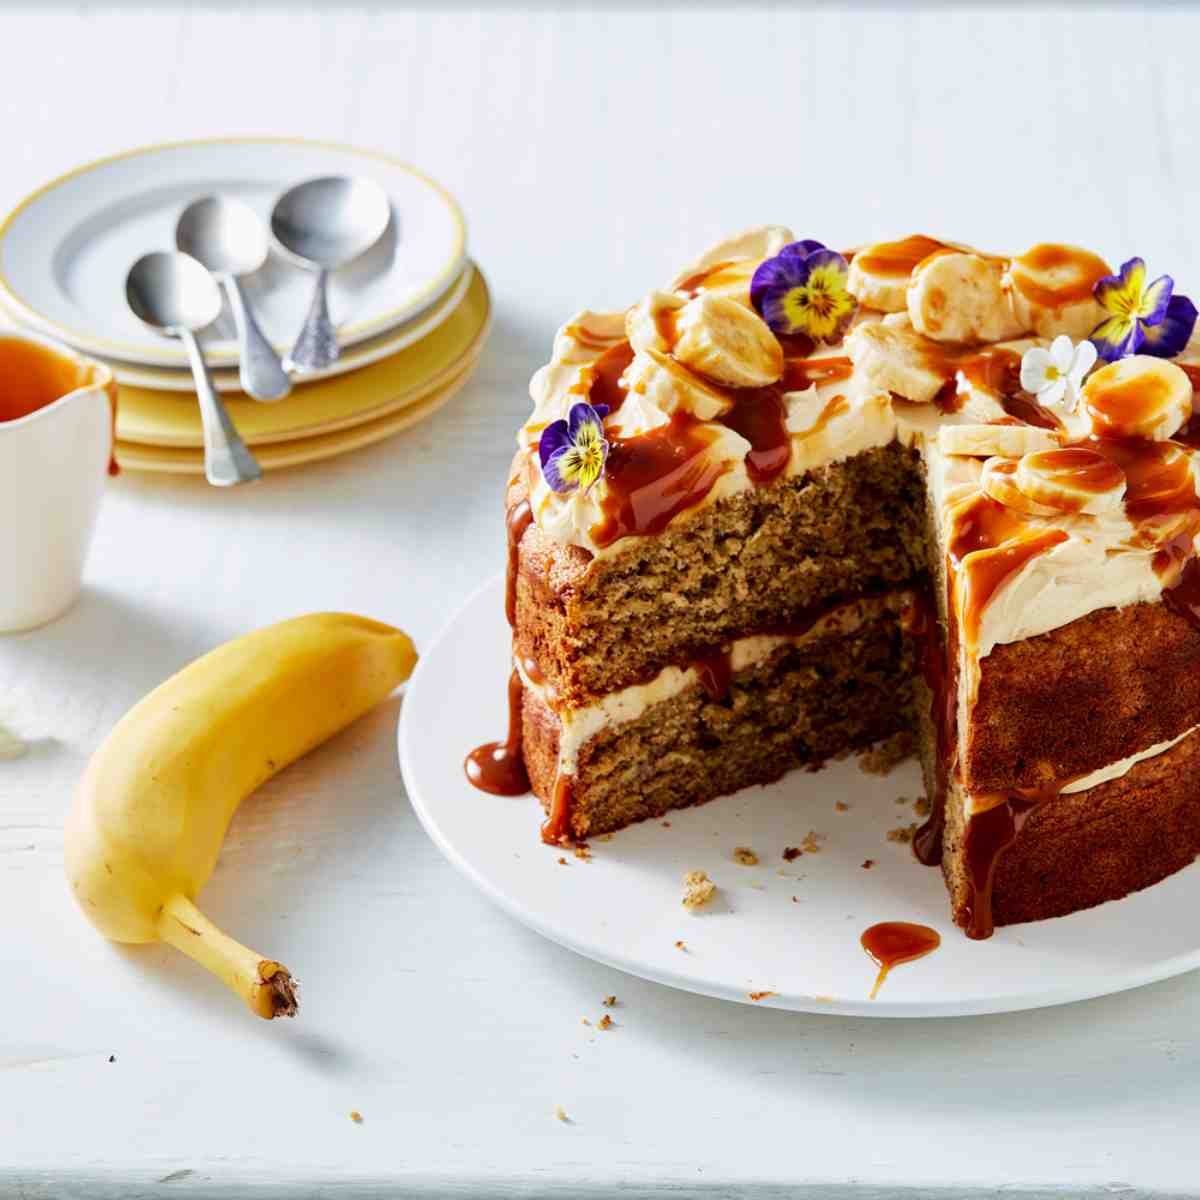 Layered banana cake topped with cream, dulce de leche, and flowers on a white plate with a Havana banana next to it.